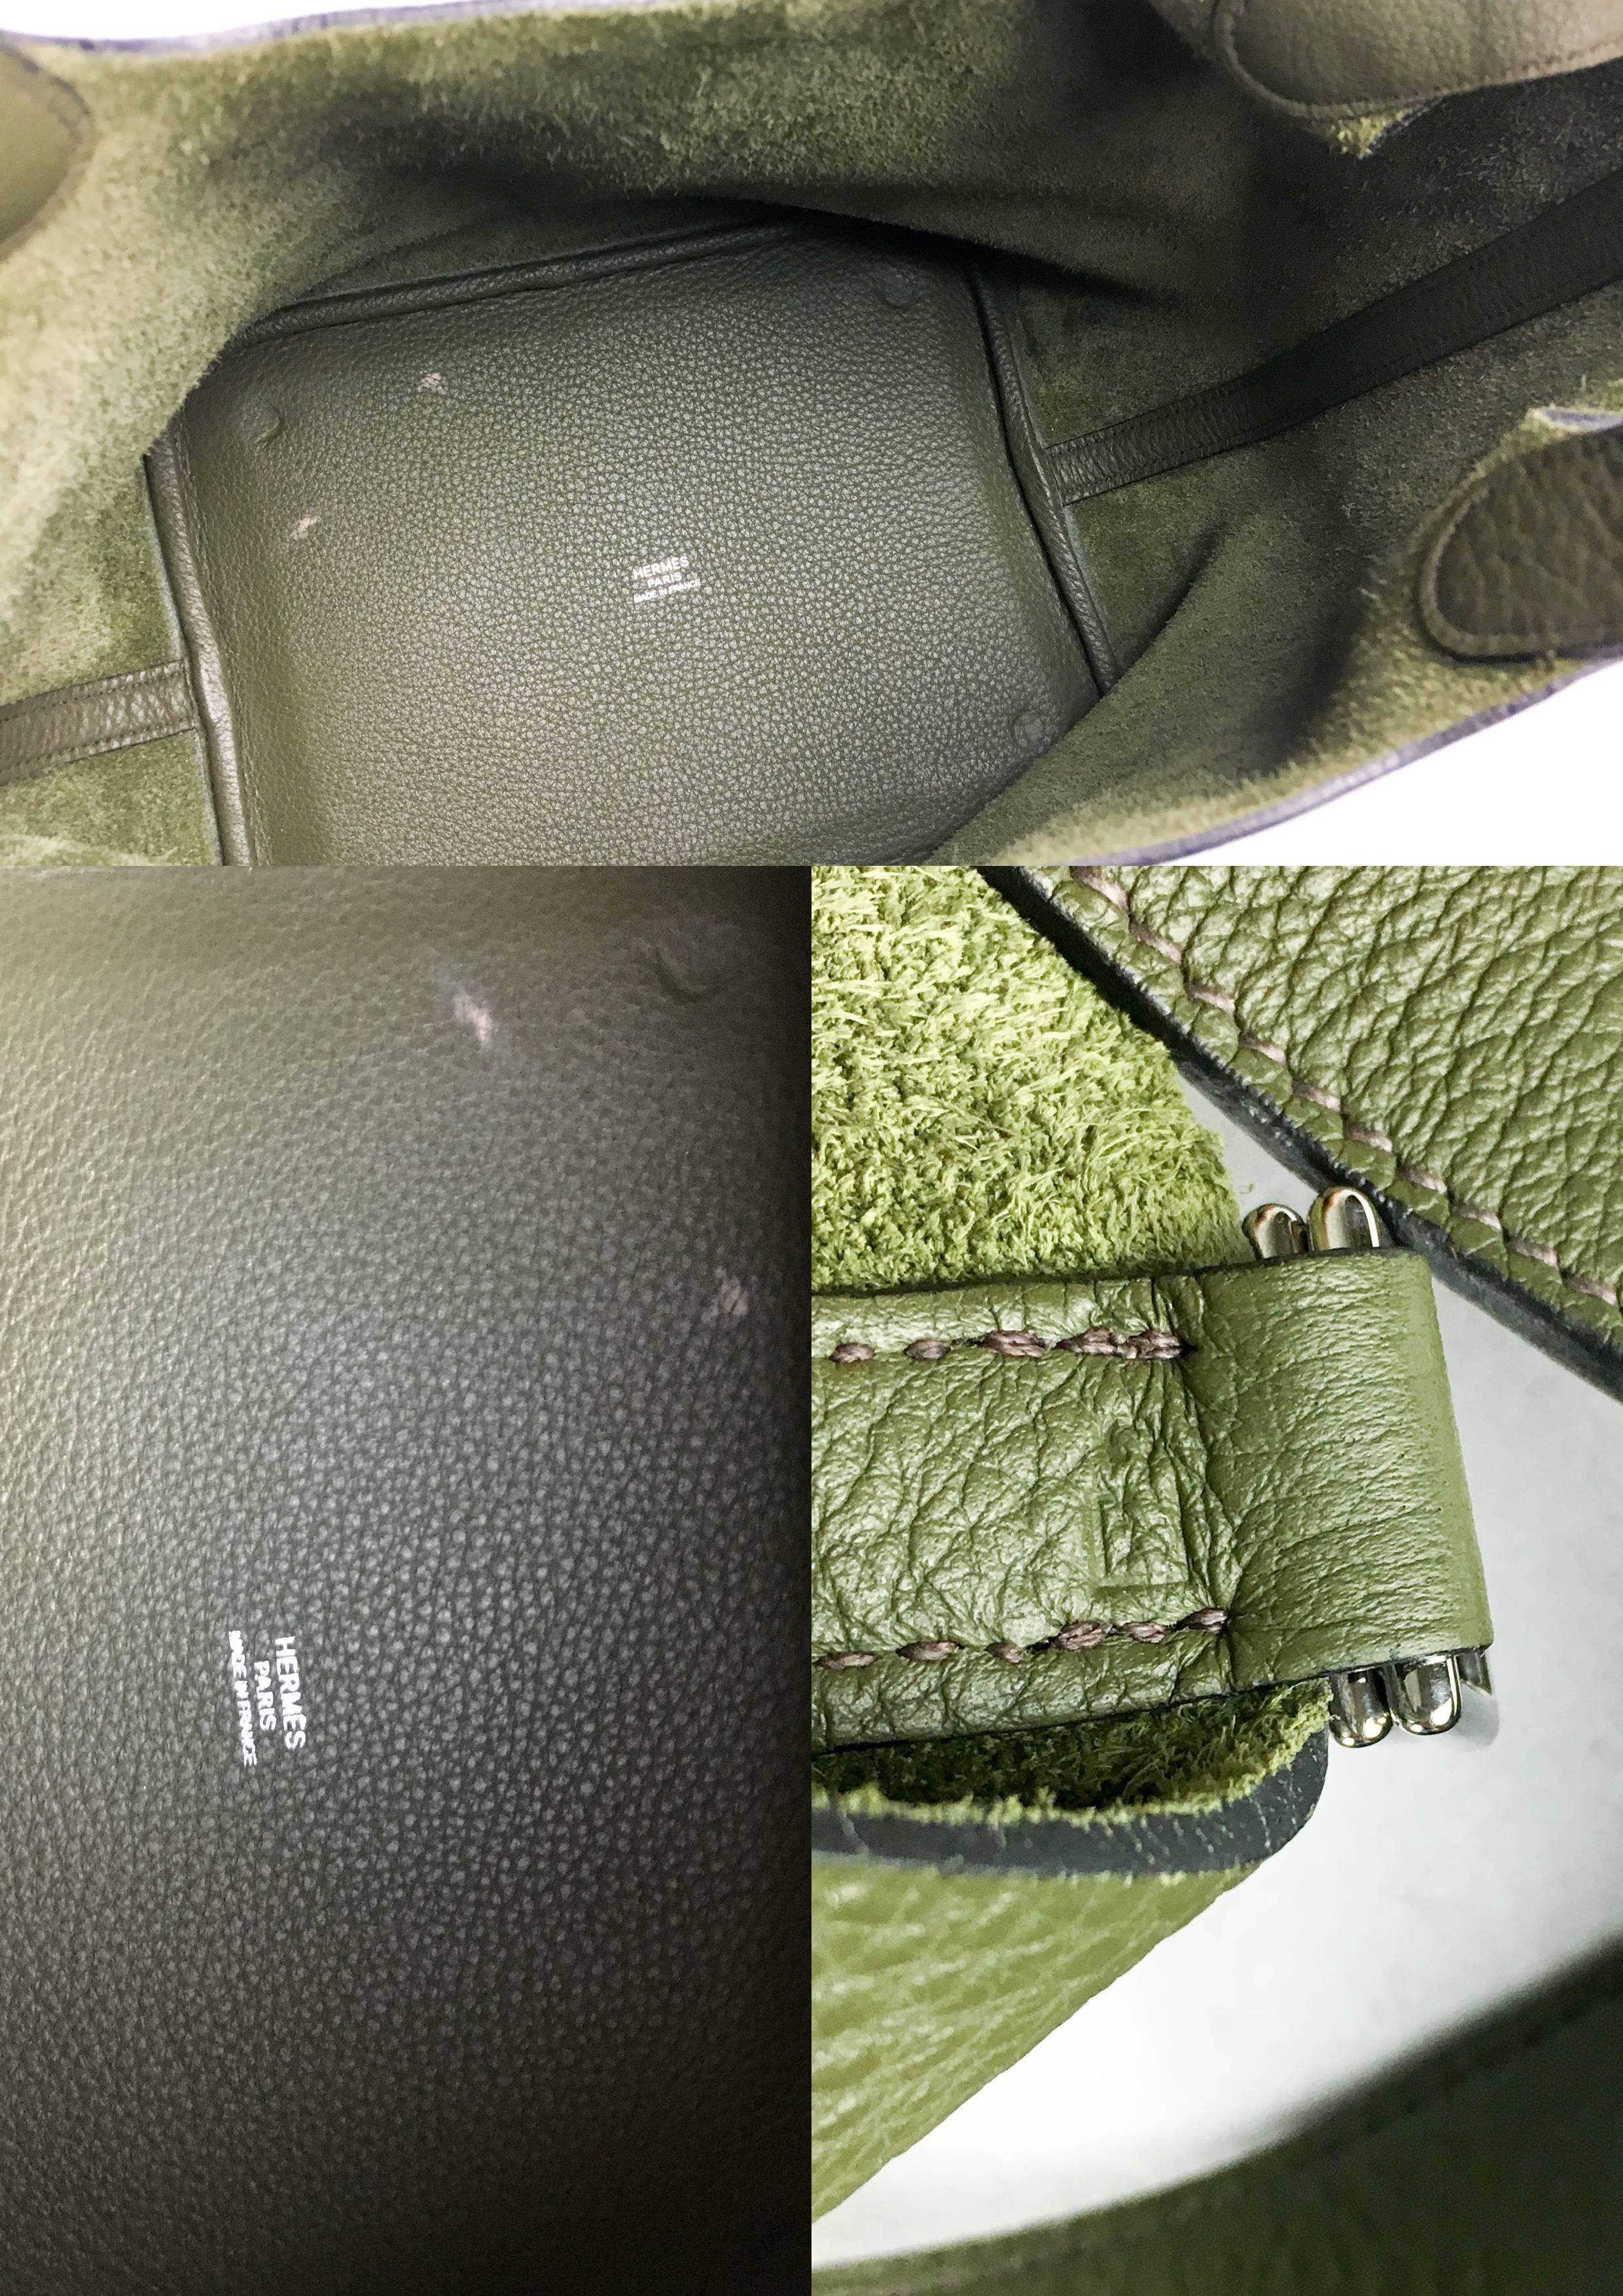 2007 Hermes Picotin 22 Handbag in Olive Green Clemence Leather For Sale 3